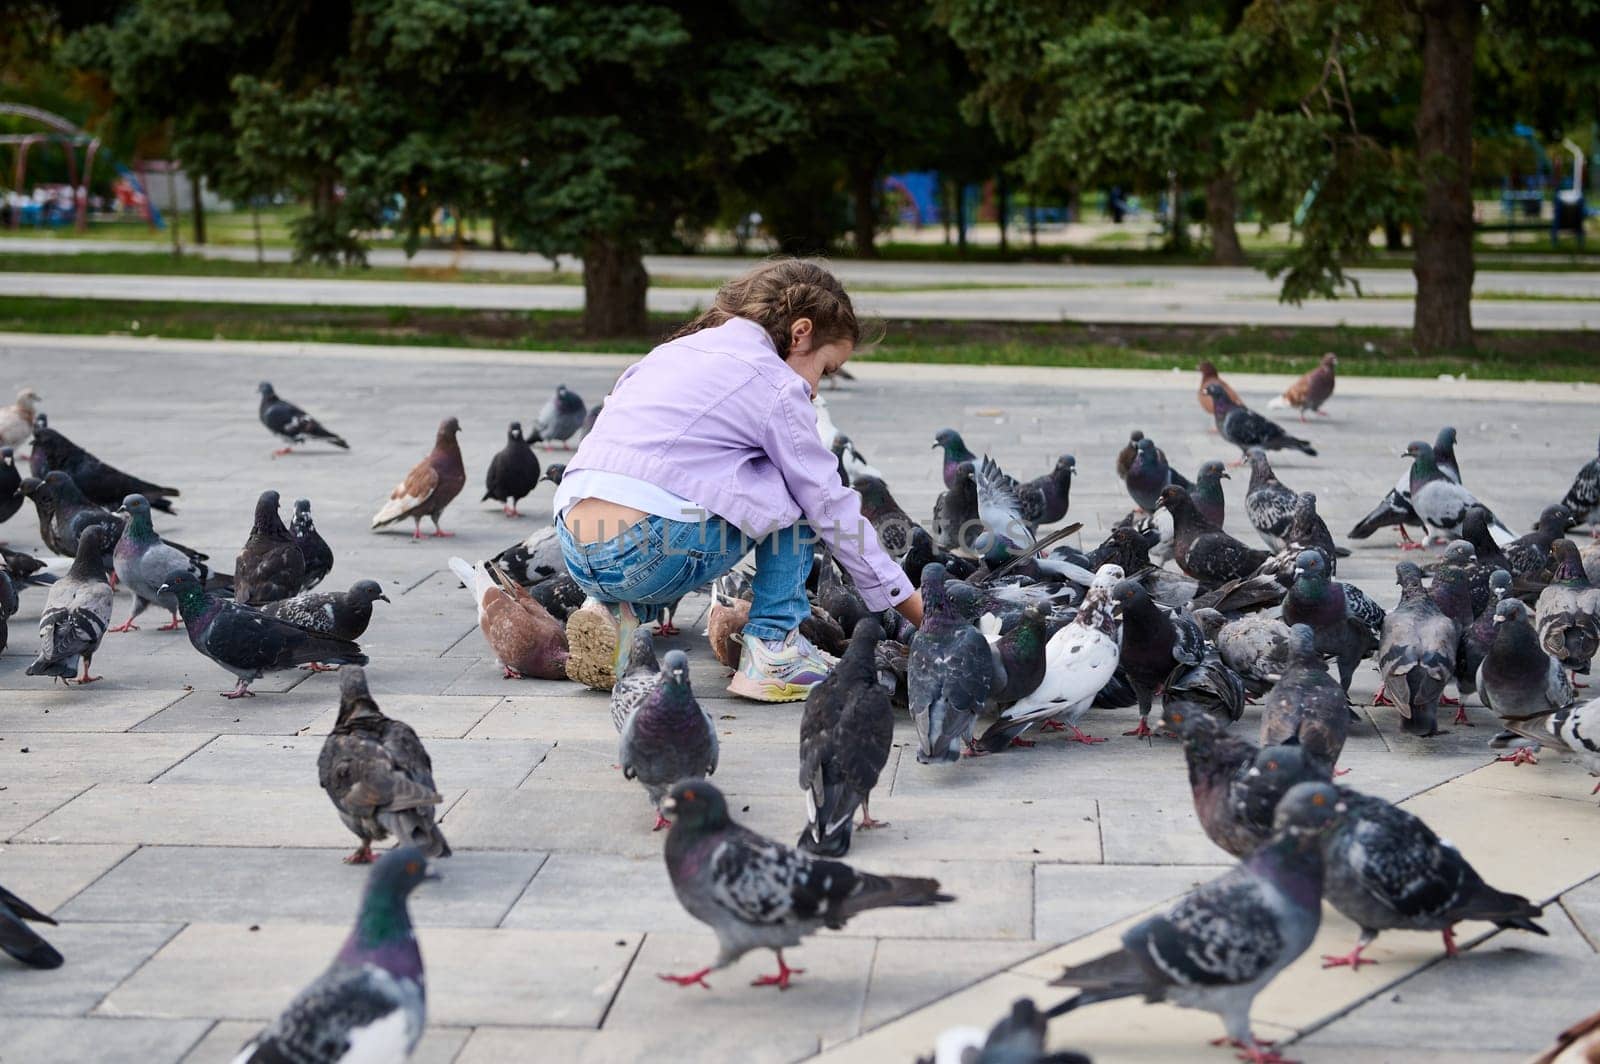 Little child girl 5 years old, feeding rock pigeons in the park square. Childhood. People, animals and nature concept by artgf